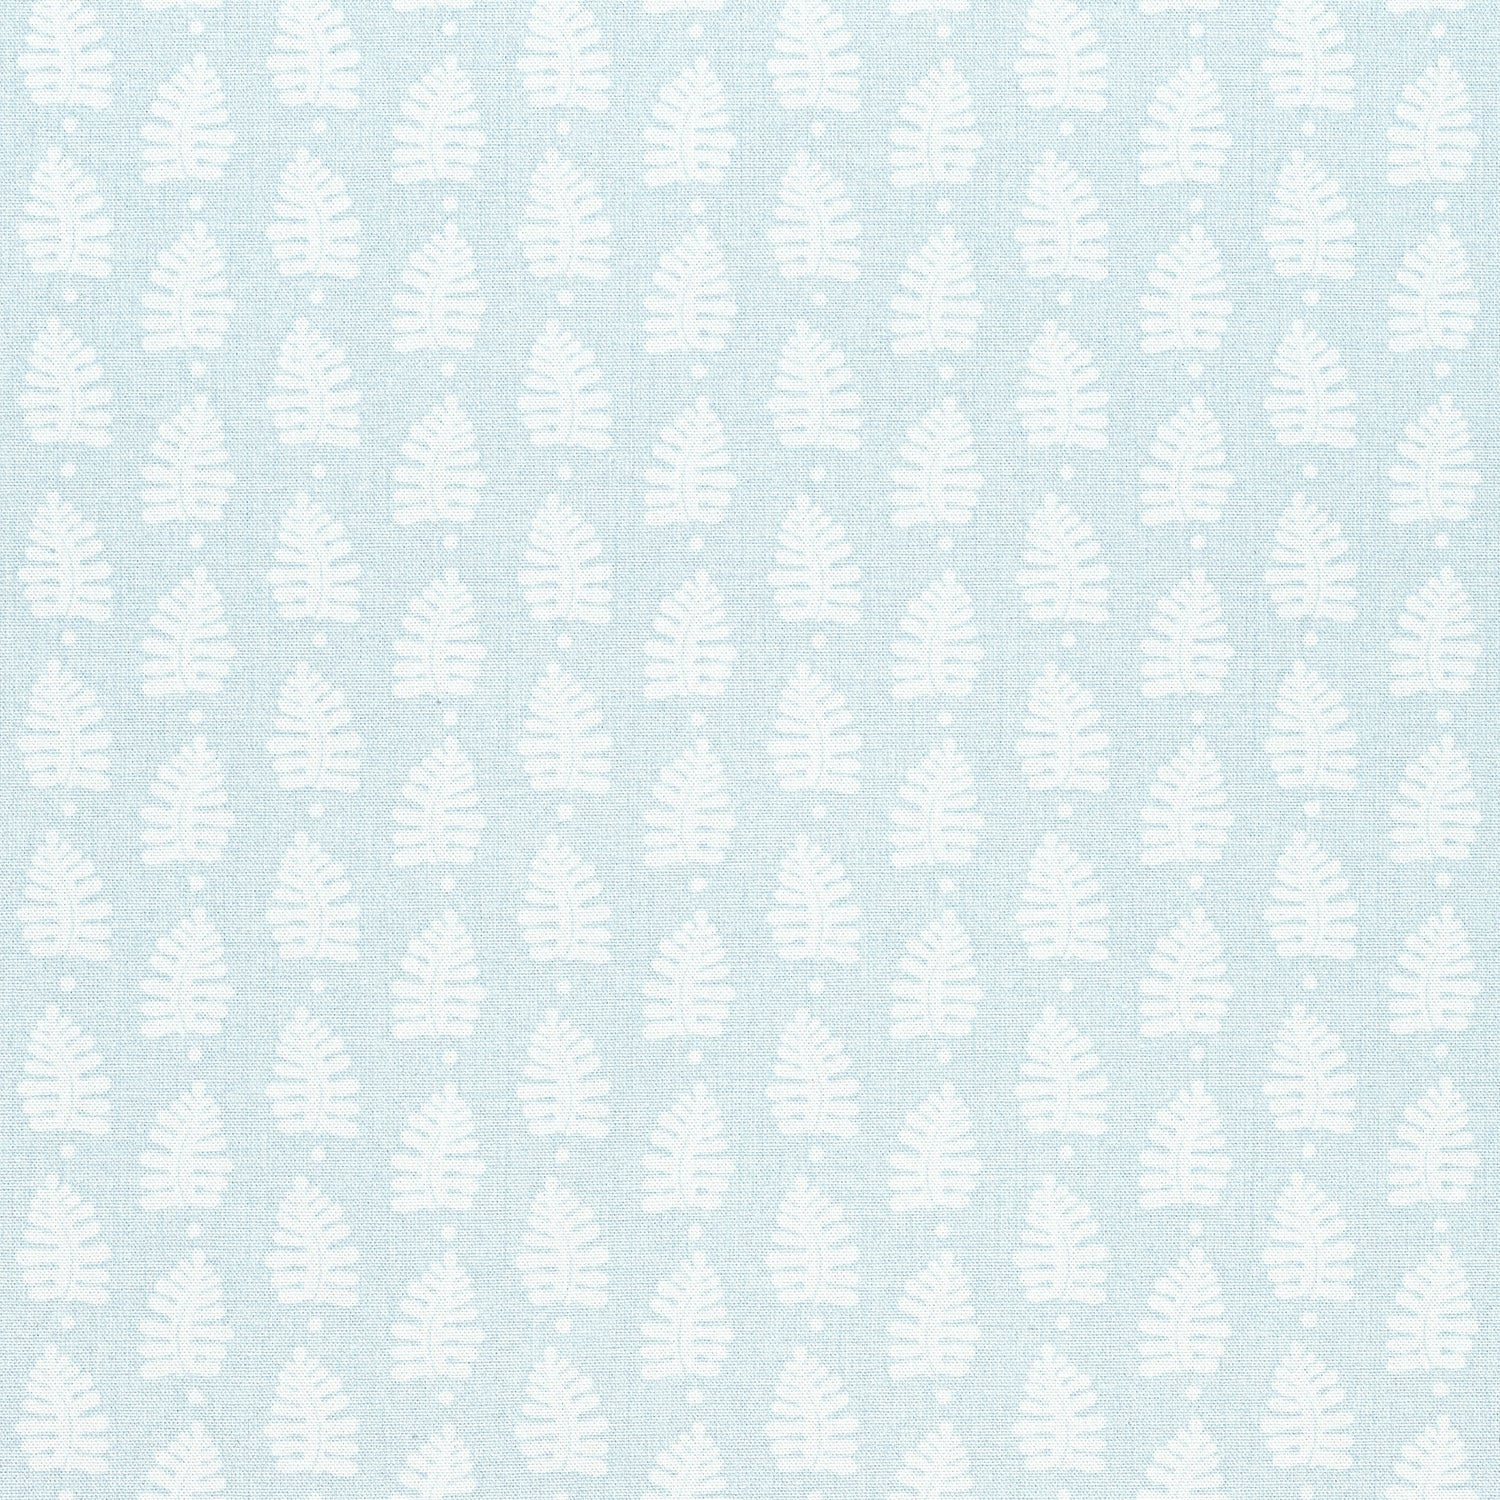 Ferndale fabric in spa blue color - pattern number F910656 - by Thibaut in the Ceylon collection